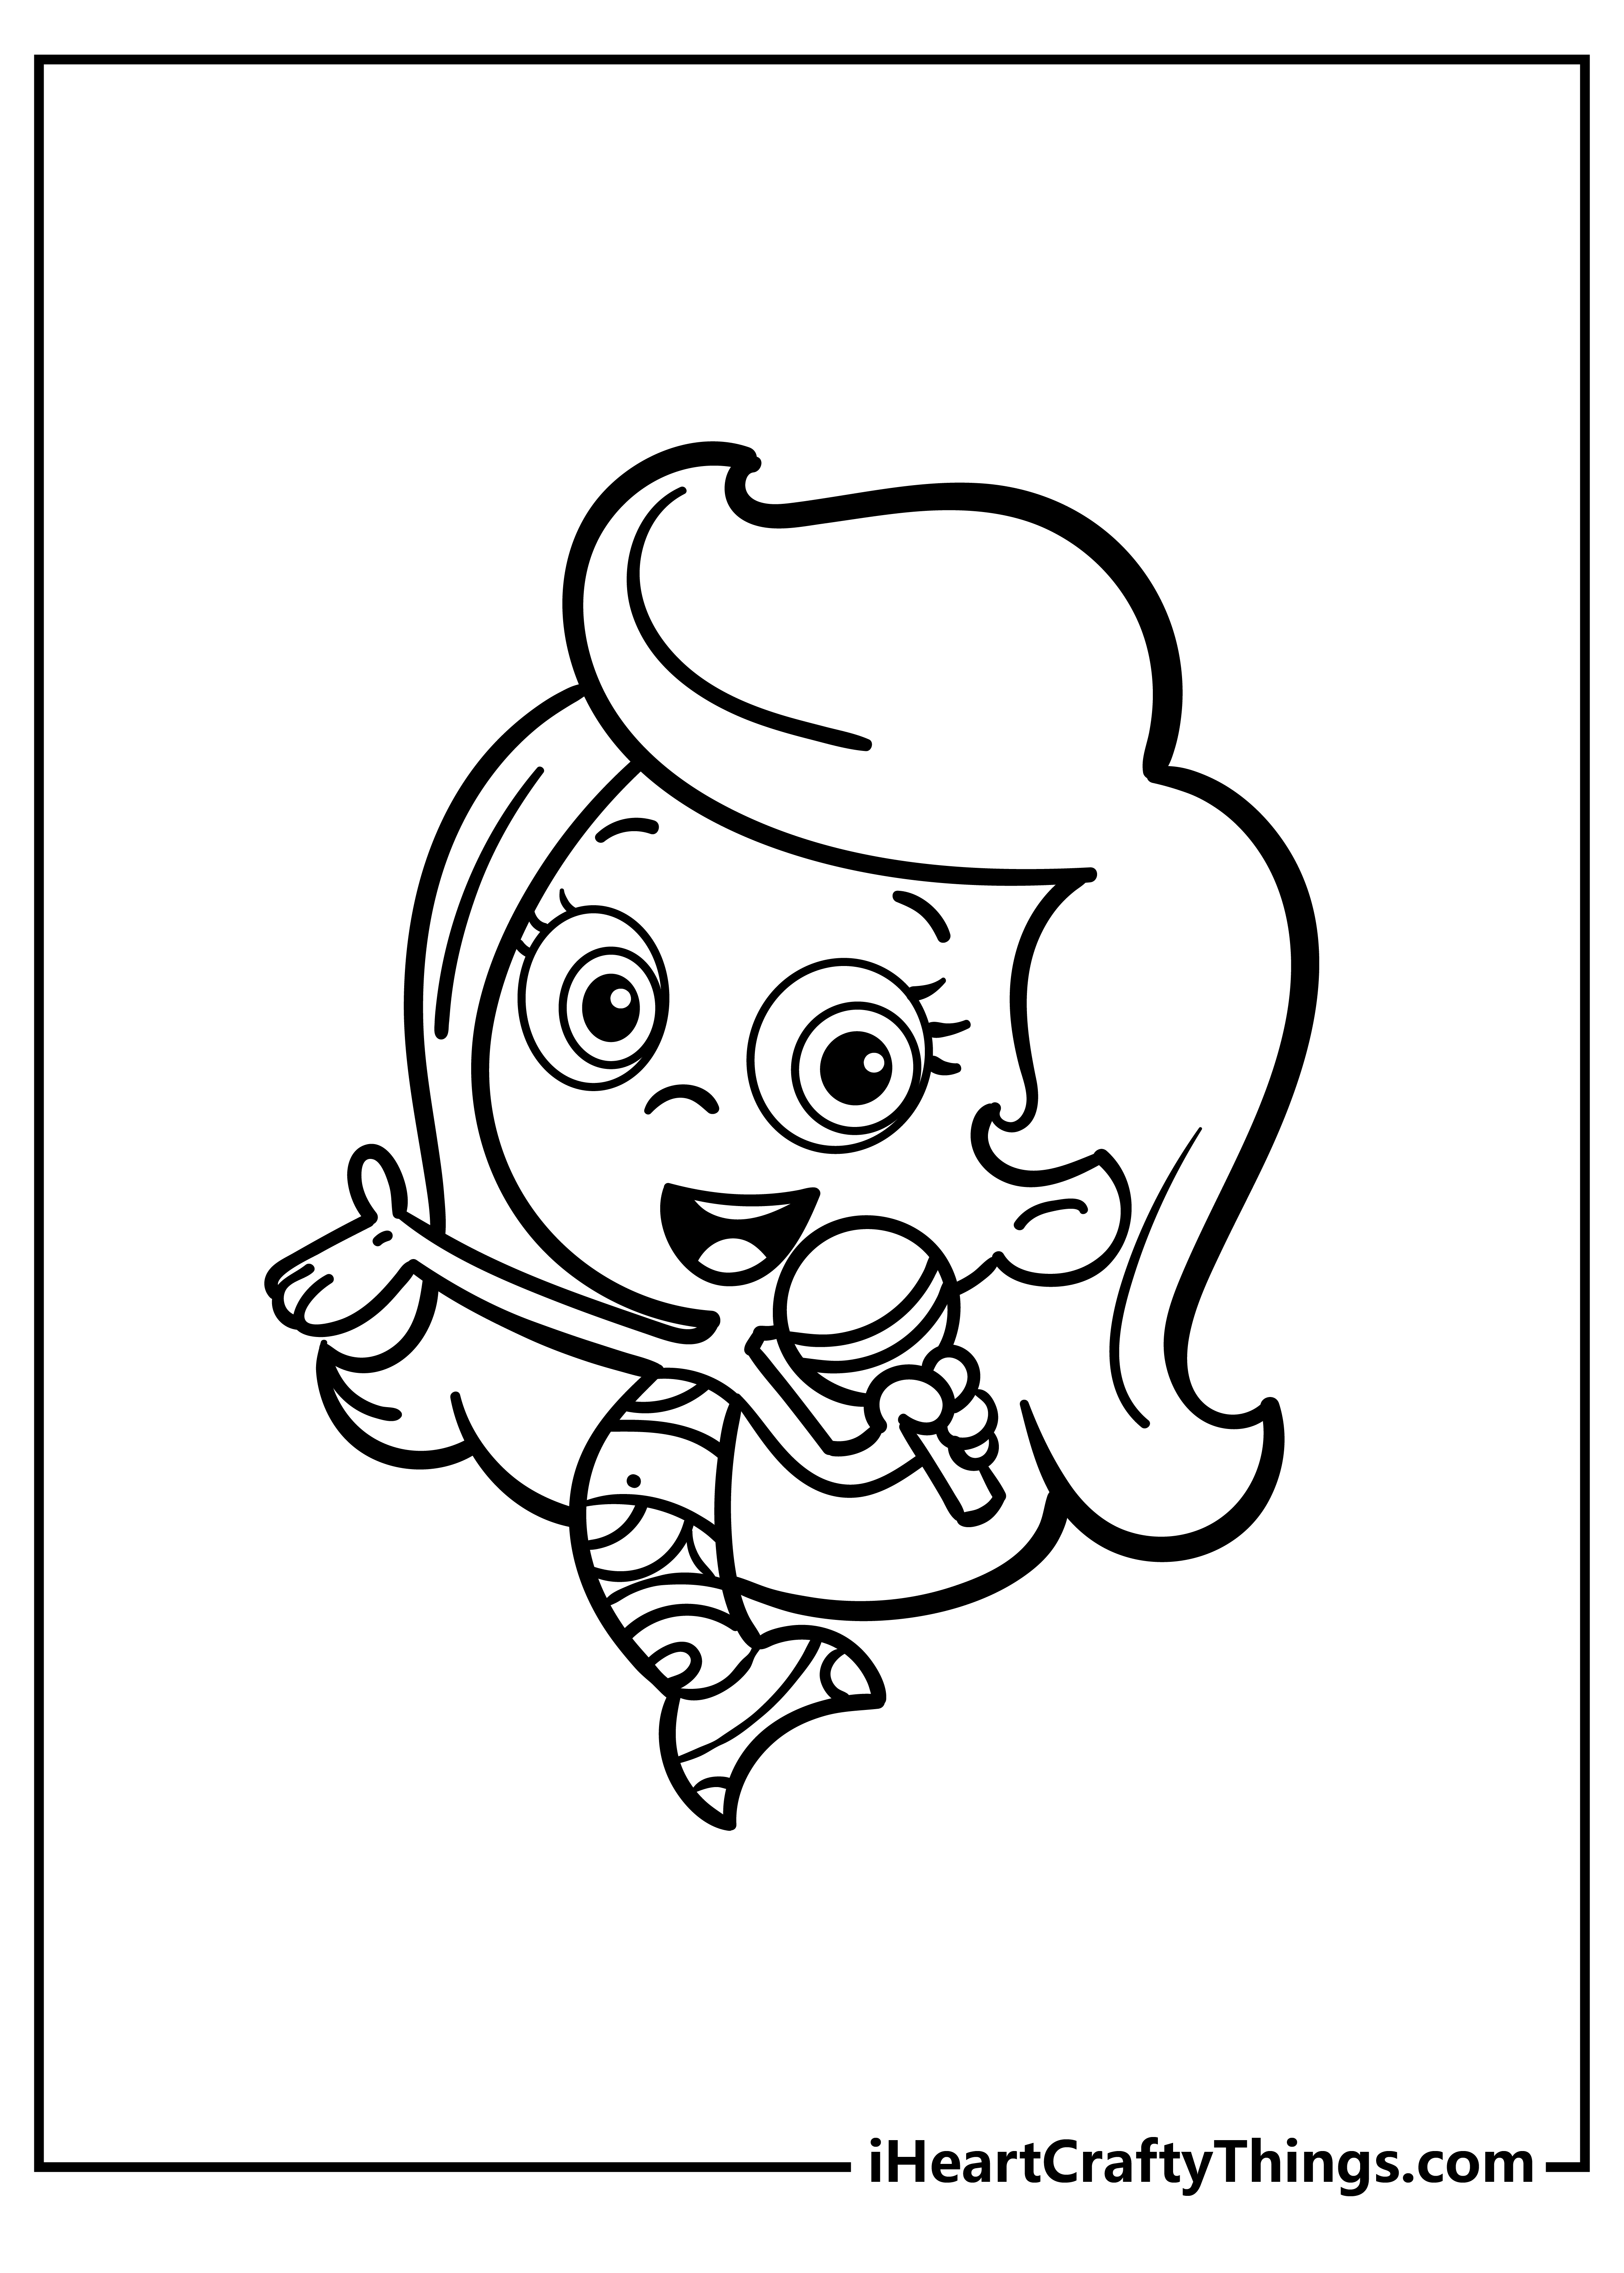 Bubble Guppies Coloring Book for adults free download